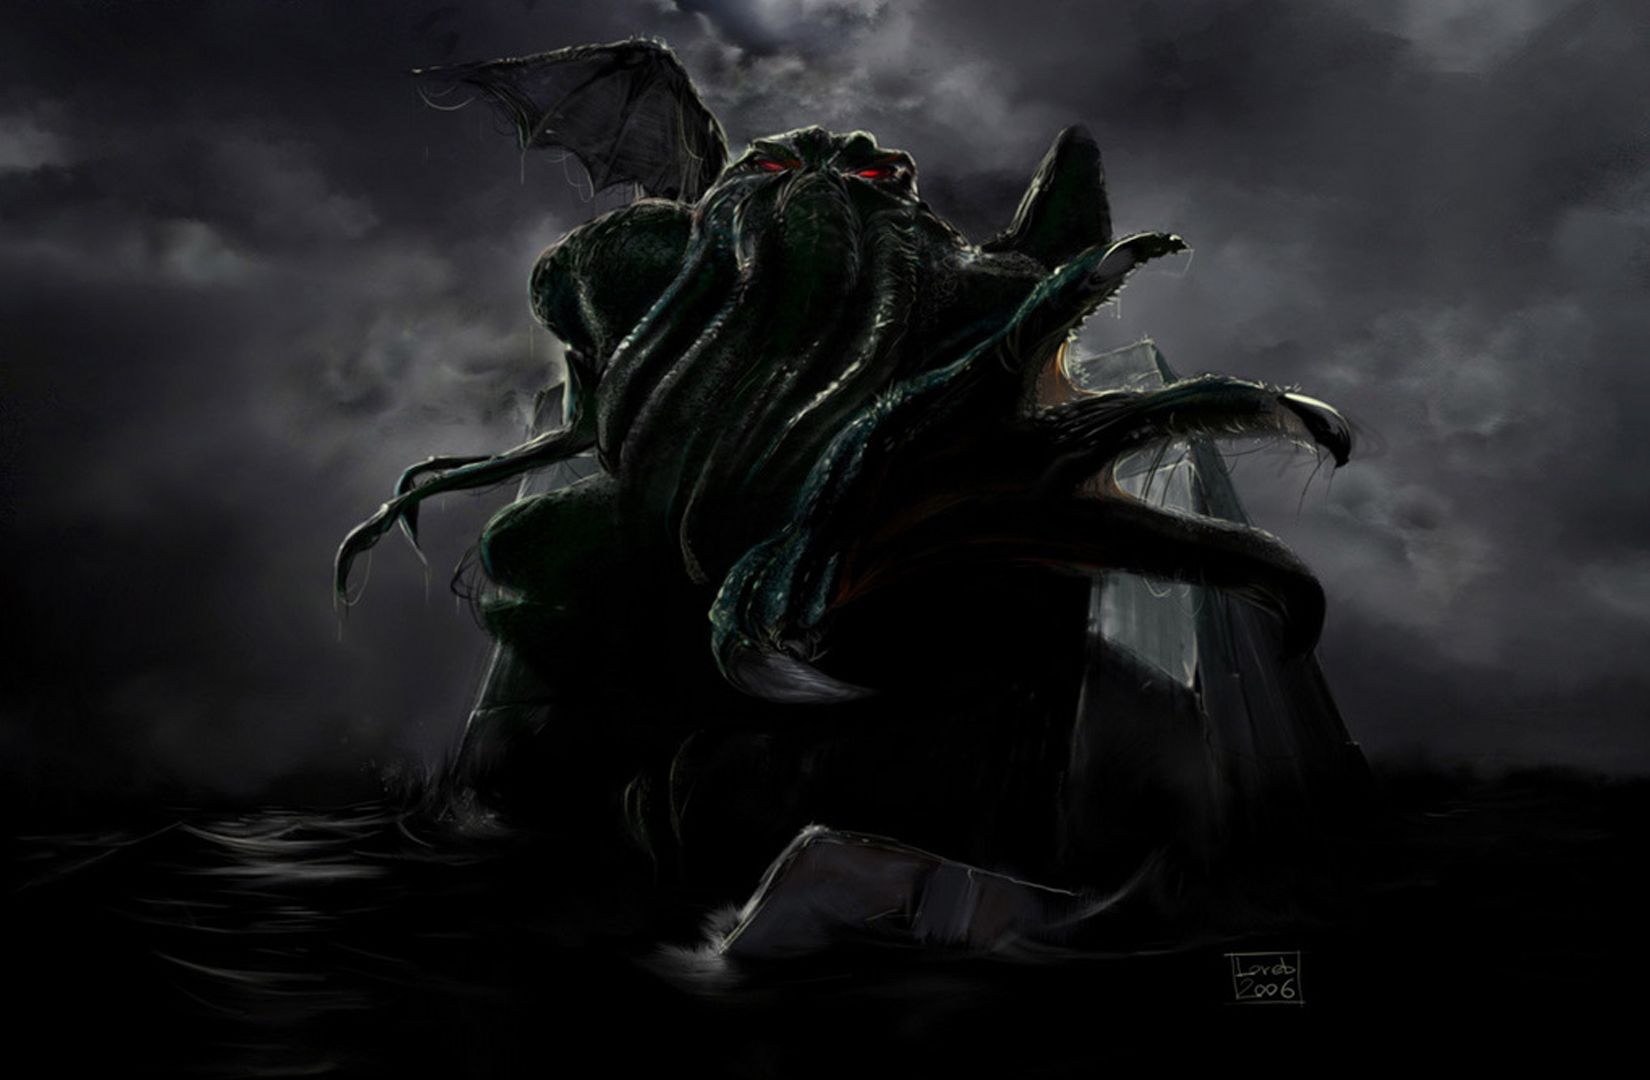 11644_1_other_wallpapers_monster_lovecraft.jpg